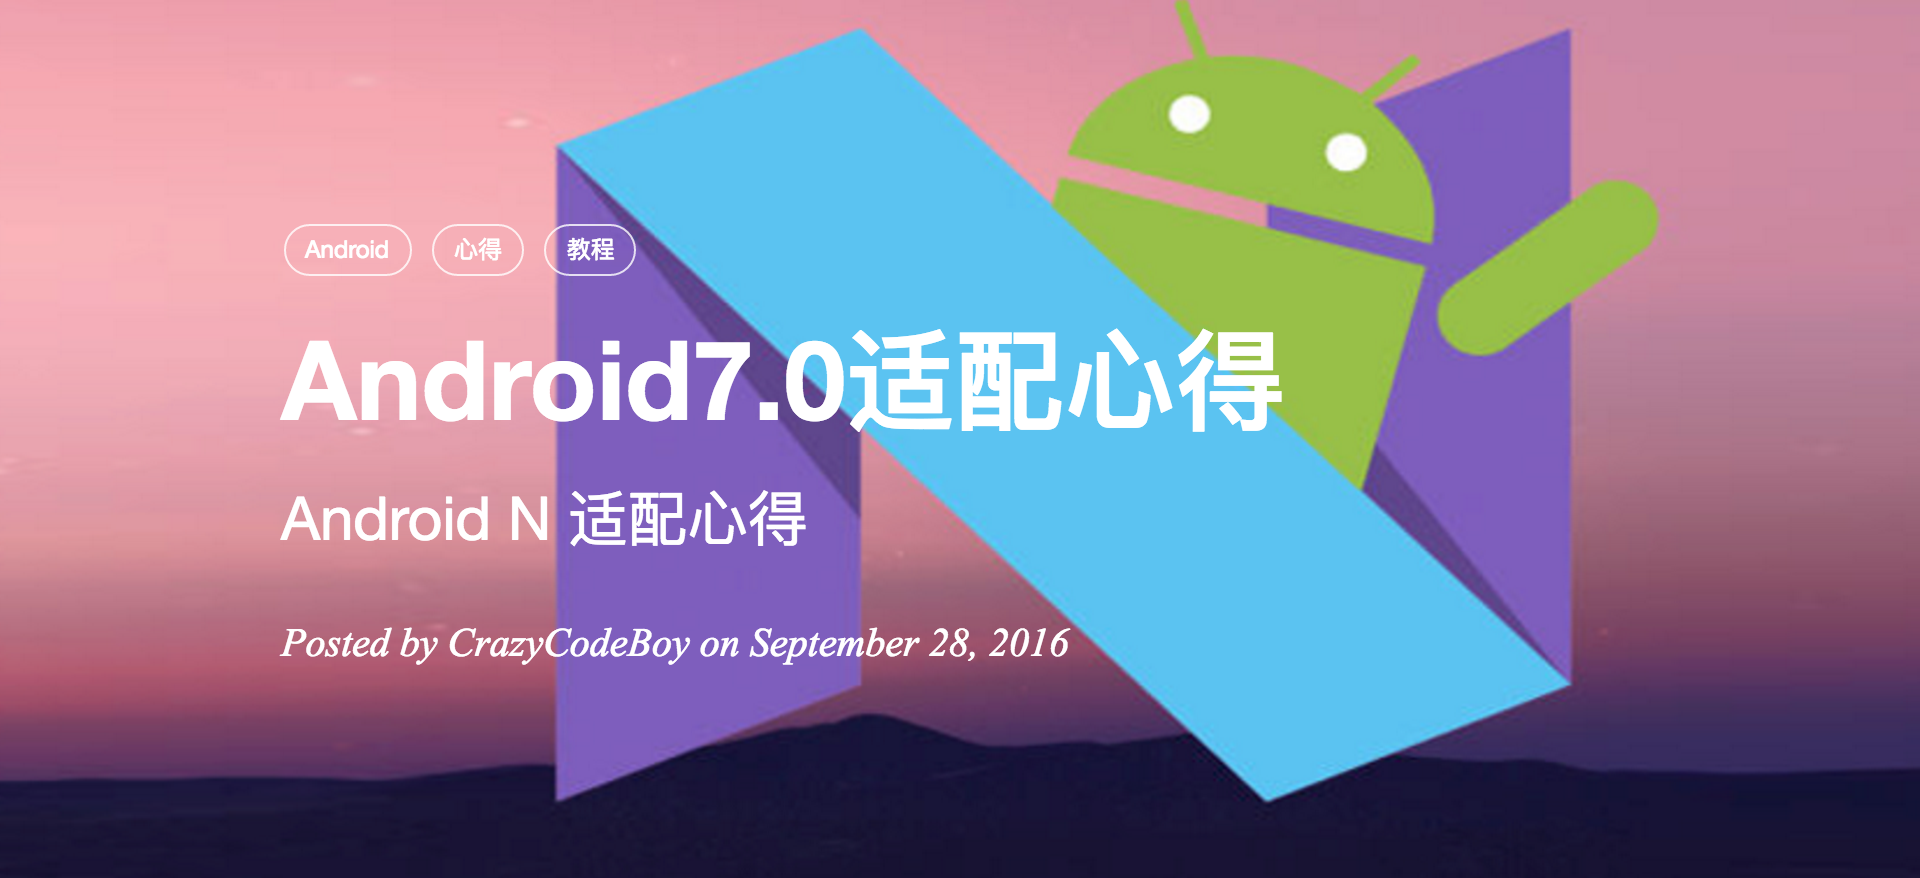 Android7.0(Android N)適配教程，心得